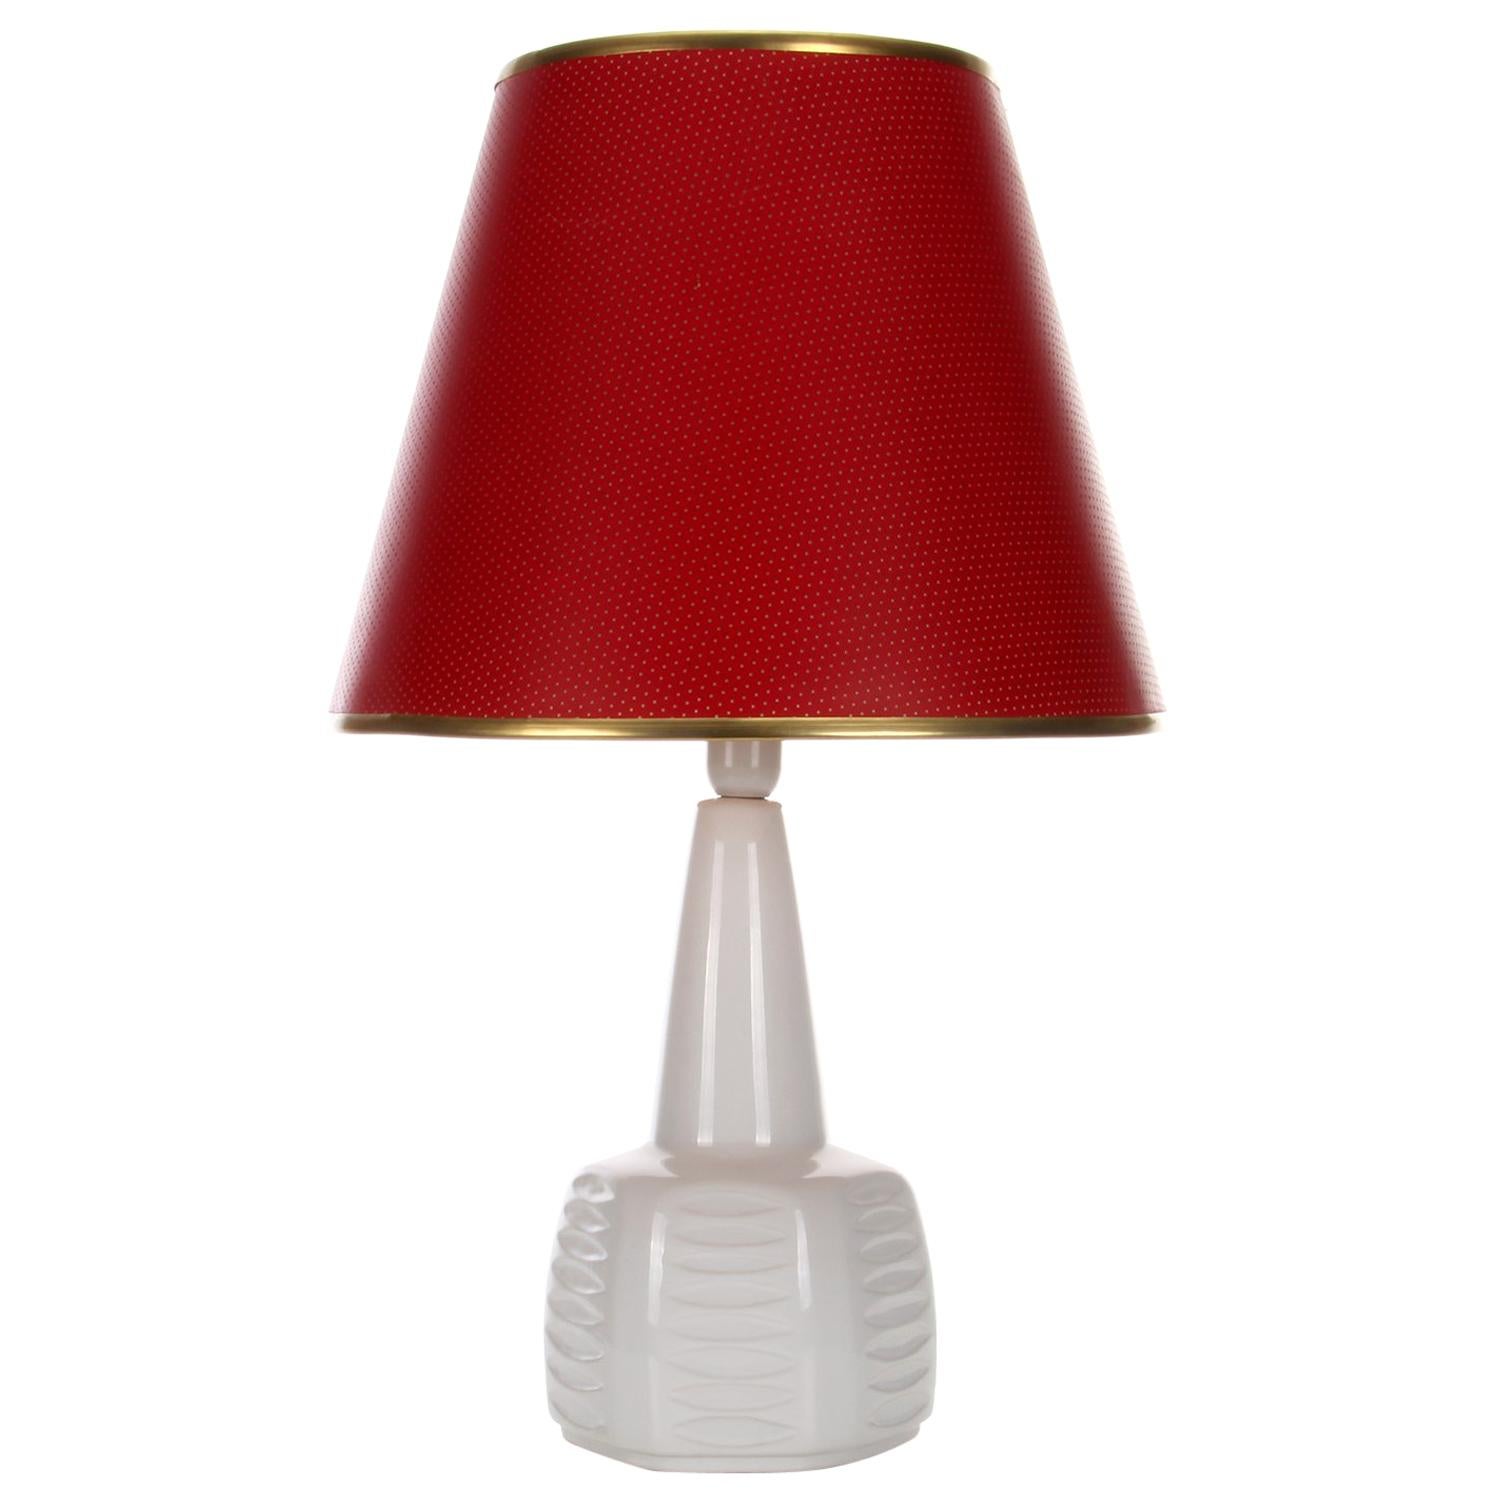 White Ceramic Table Lamp by Einar Johansen for Soholm 1960s with Shade Included For Sale